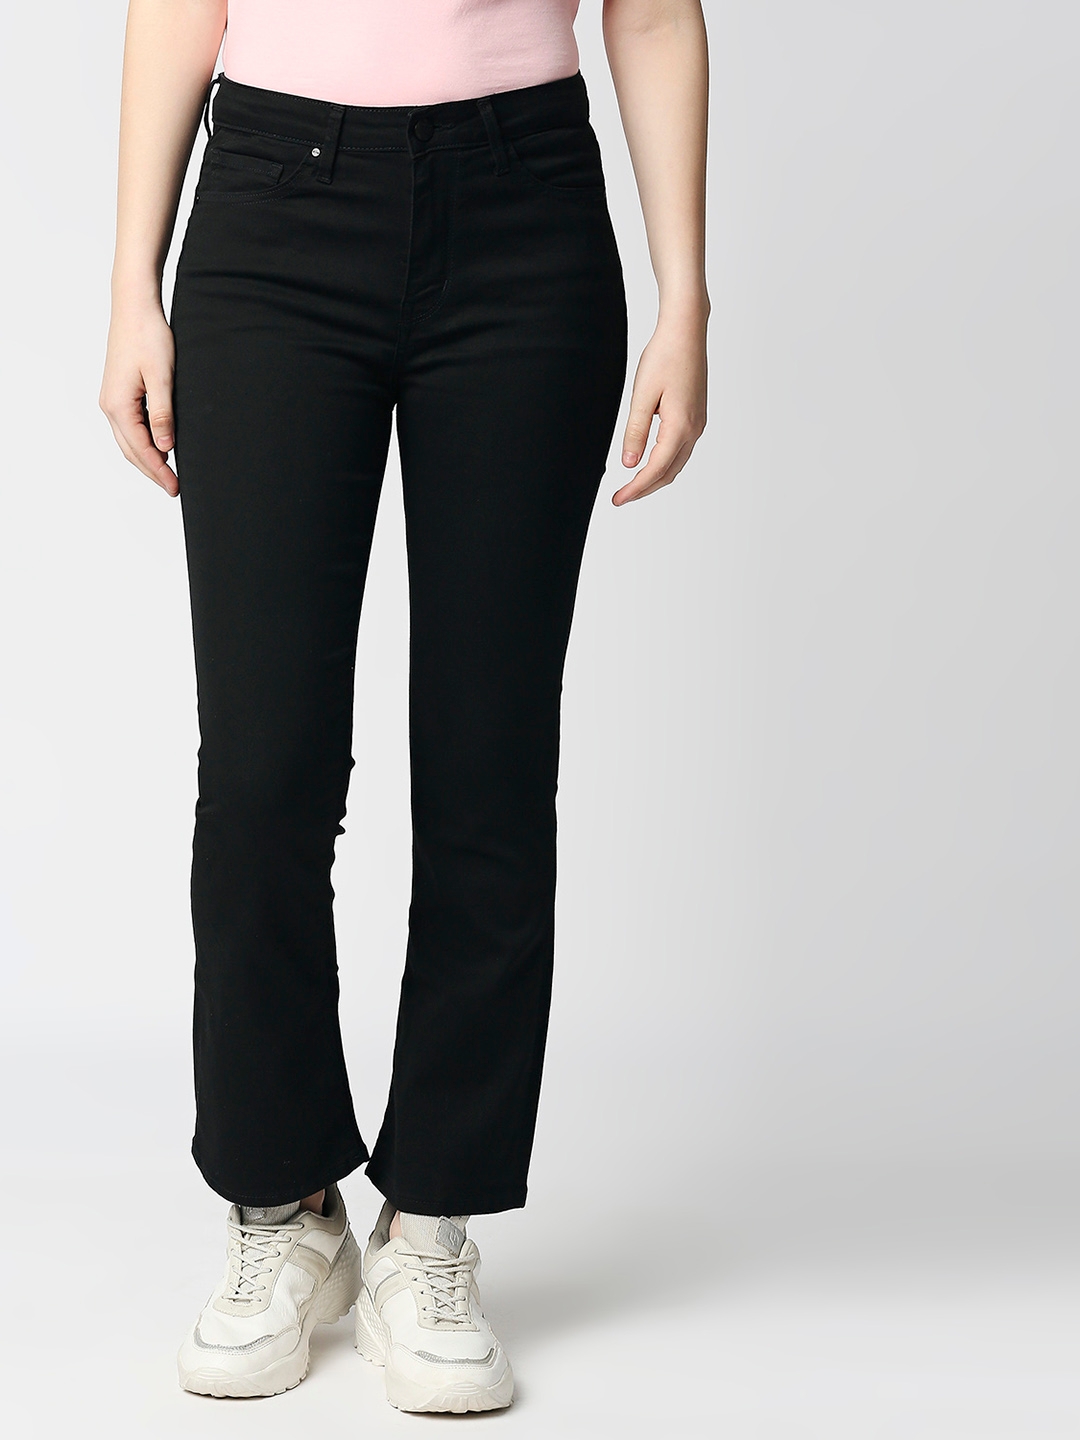 Women's Black Cotton Solid Flared Jeans